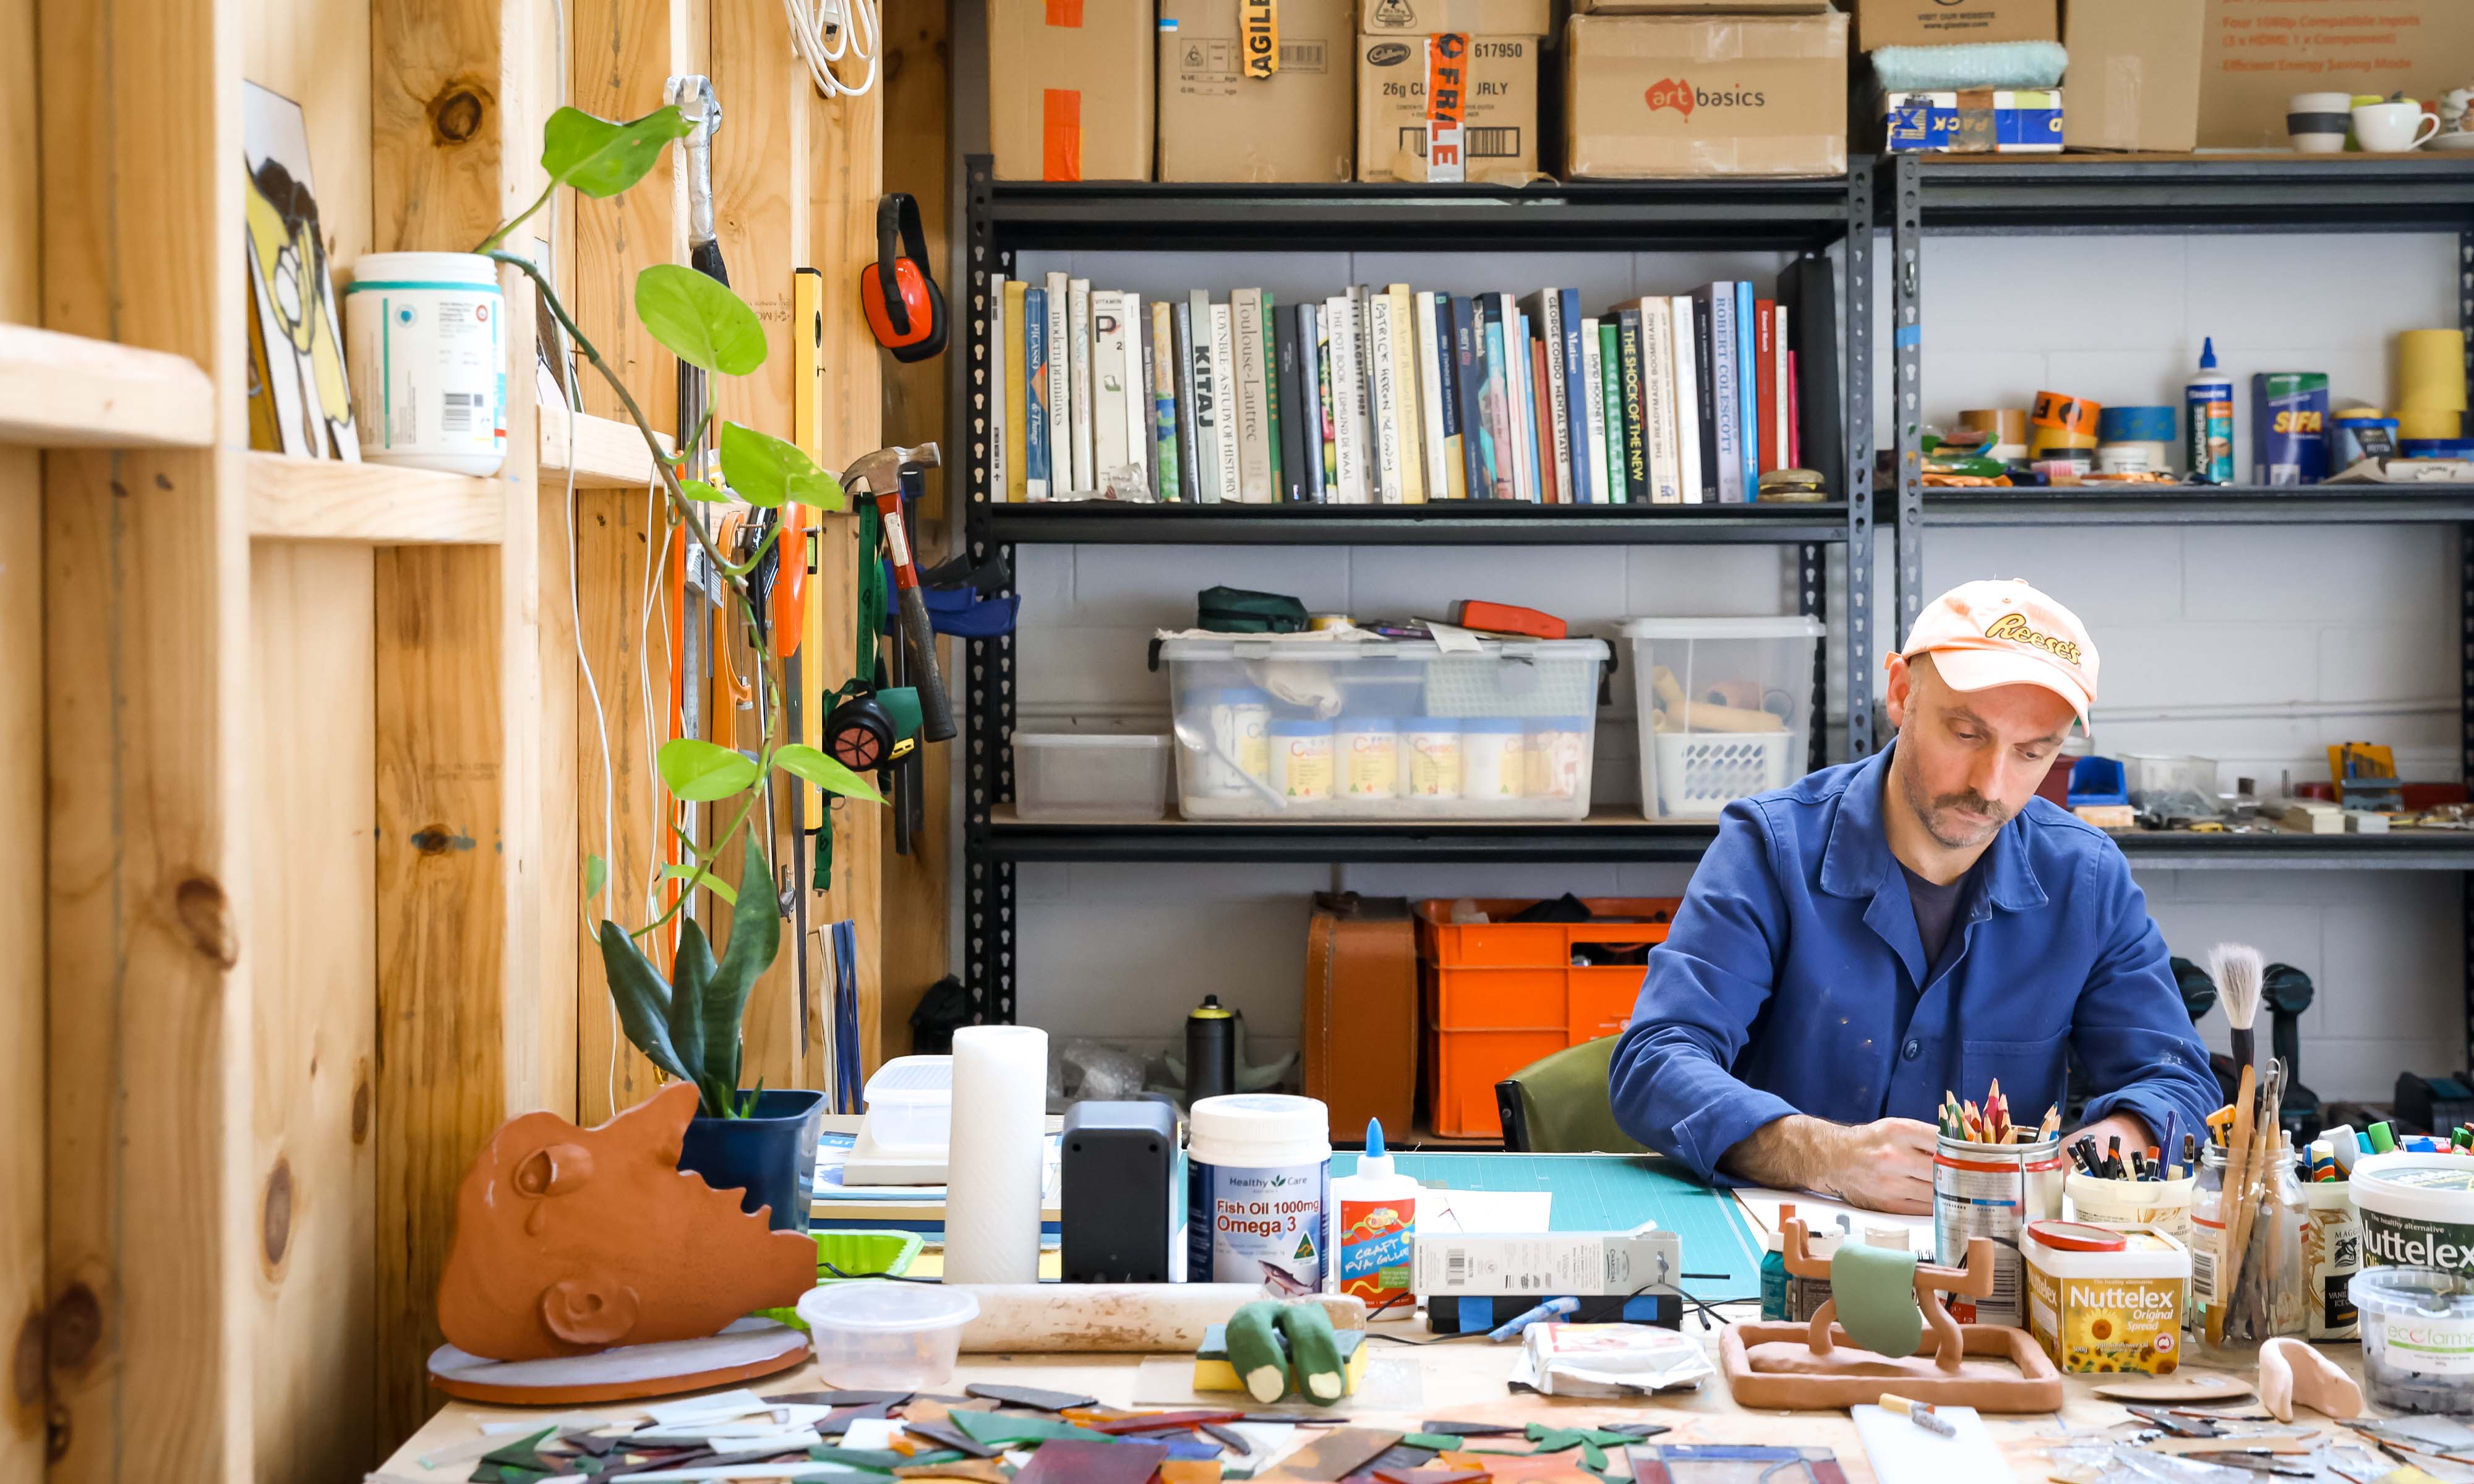 A man in a blue shirt and white cap sits in a studio filled with art and art materials